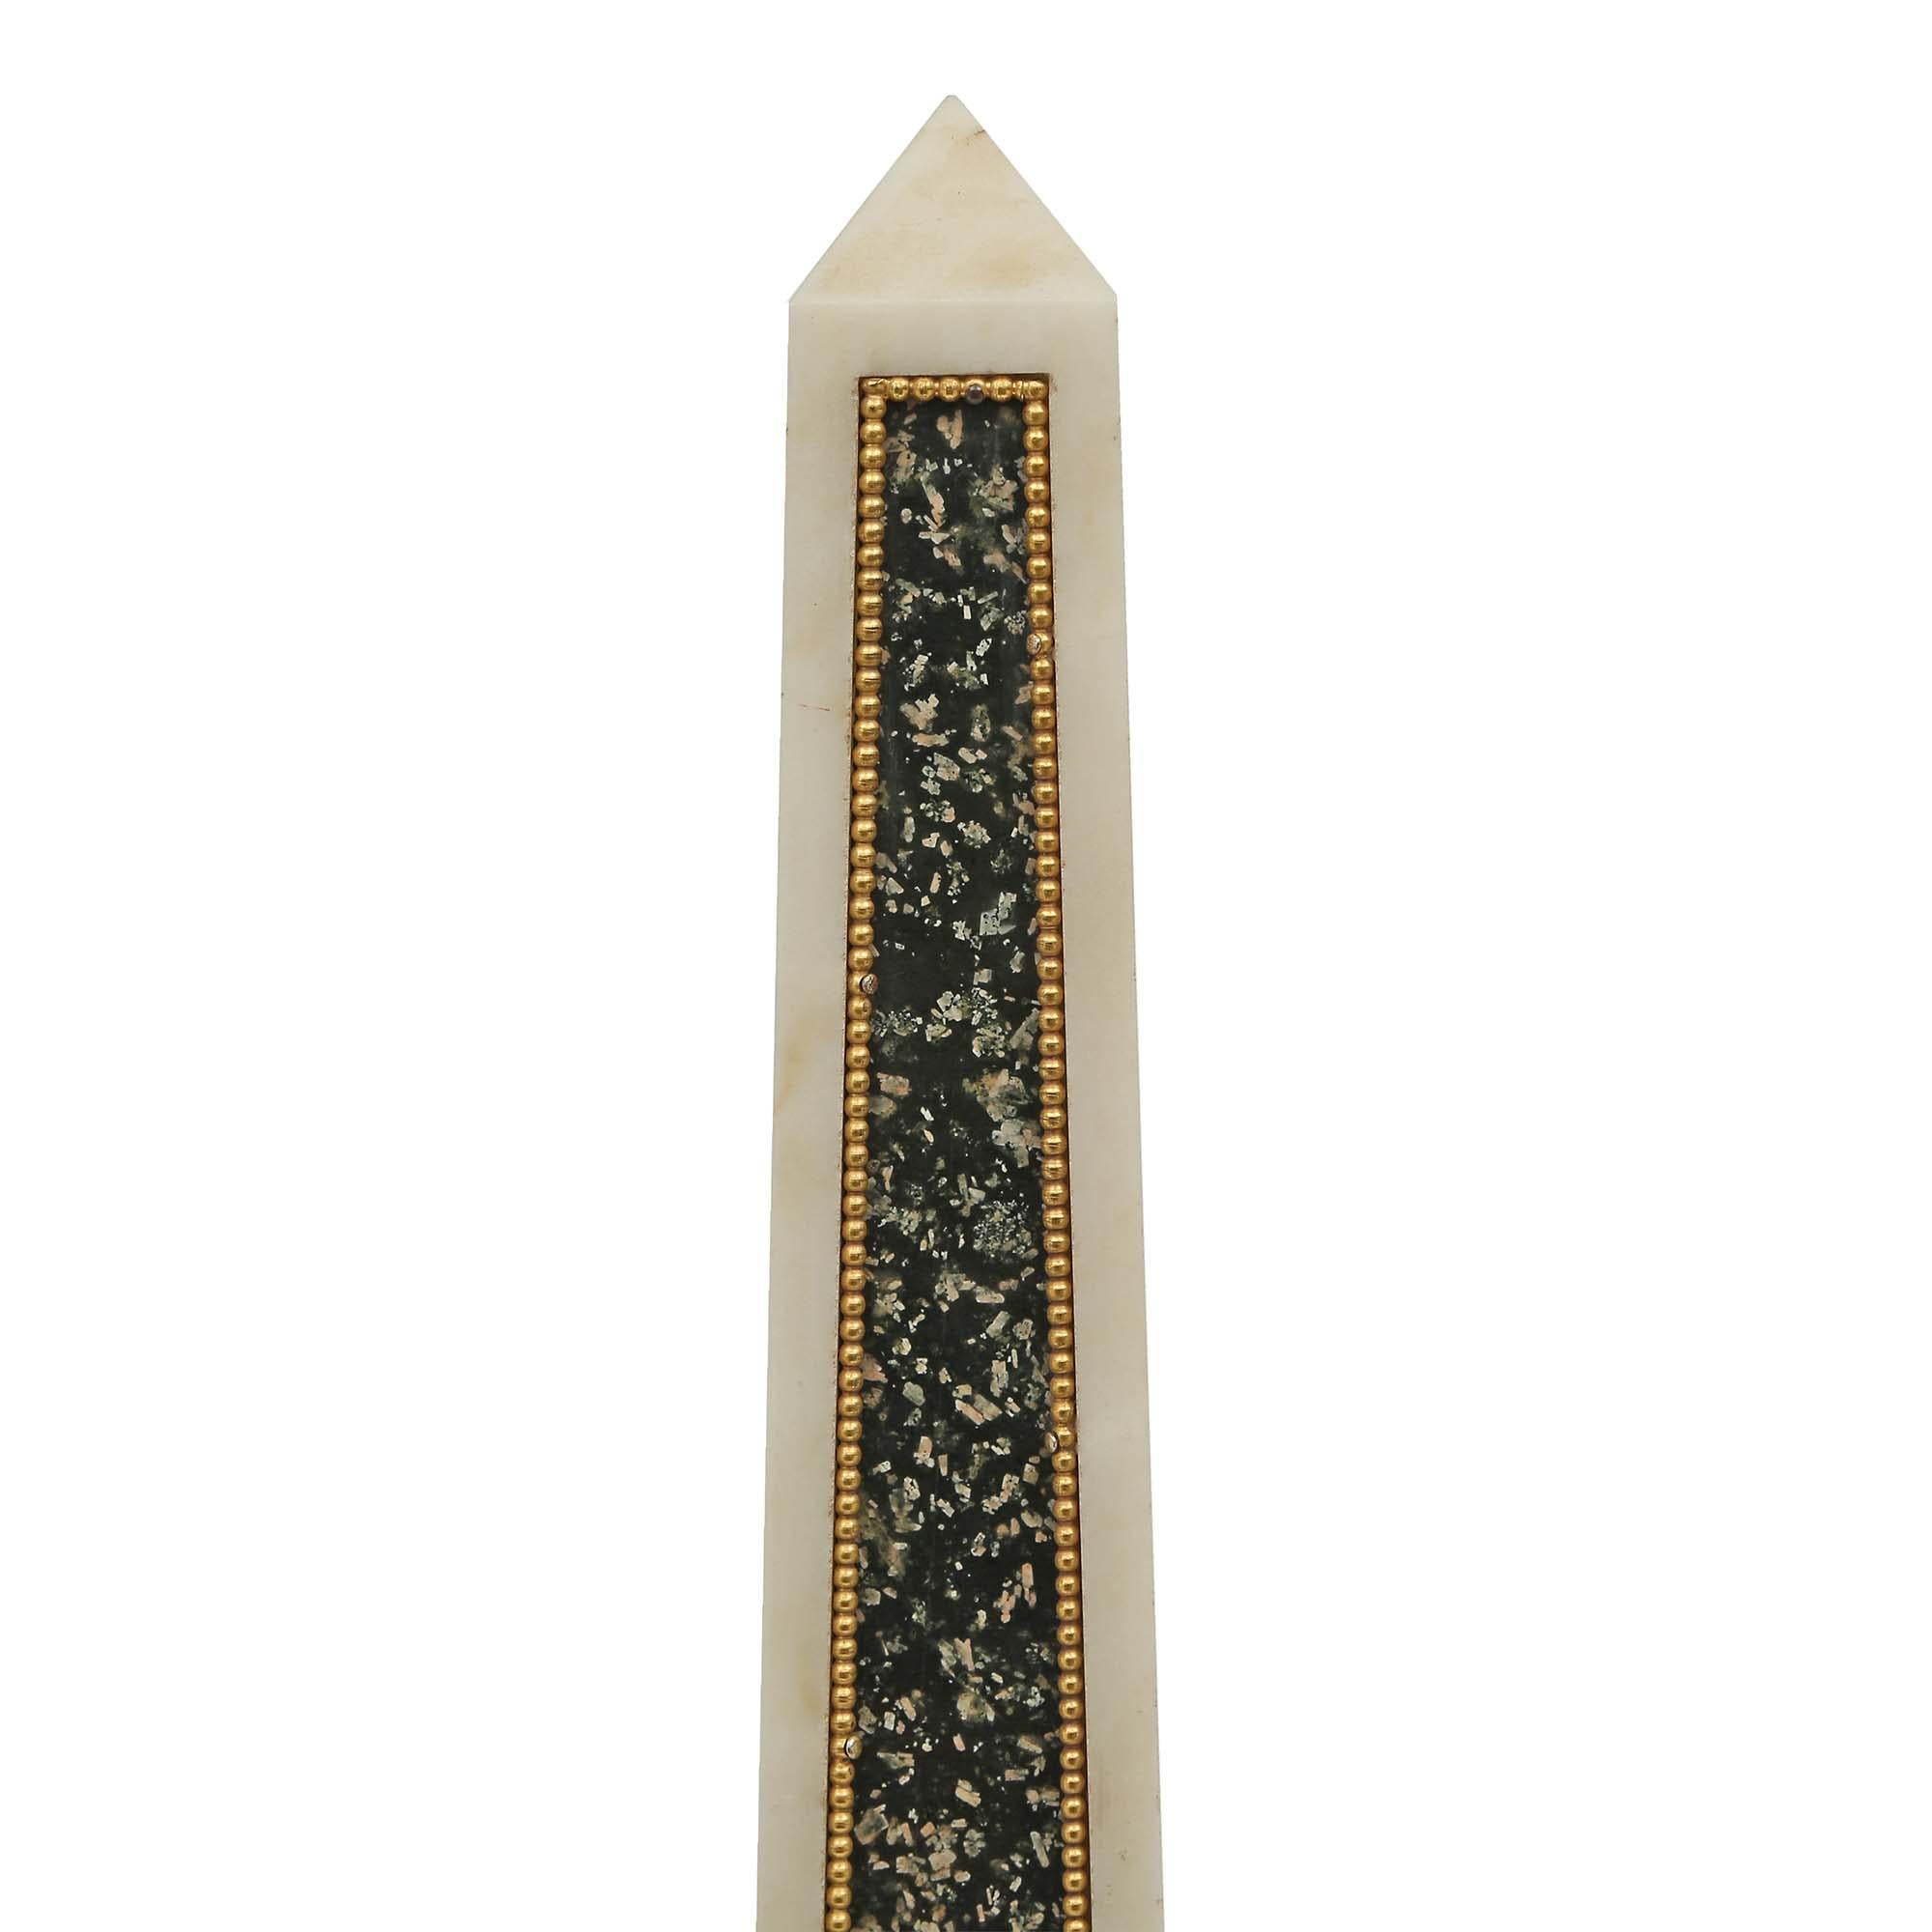 Italian 19th Century Marble and Ormolu Obelisk In Good Condition For Sale In West Palm Beach, FL